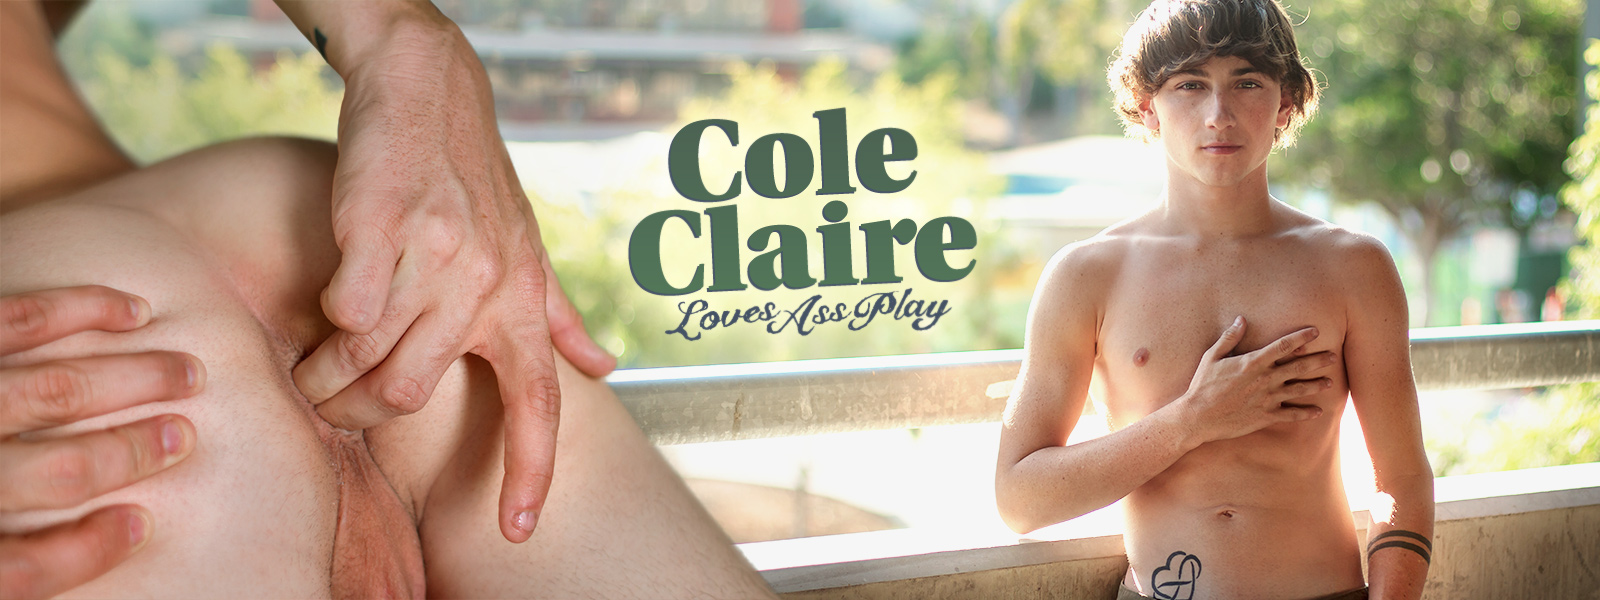 Cole Claire Loves Ass Play